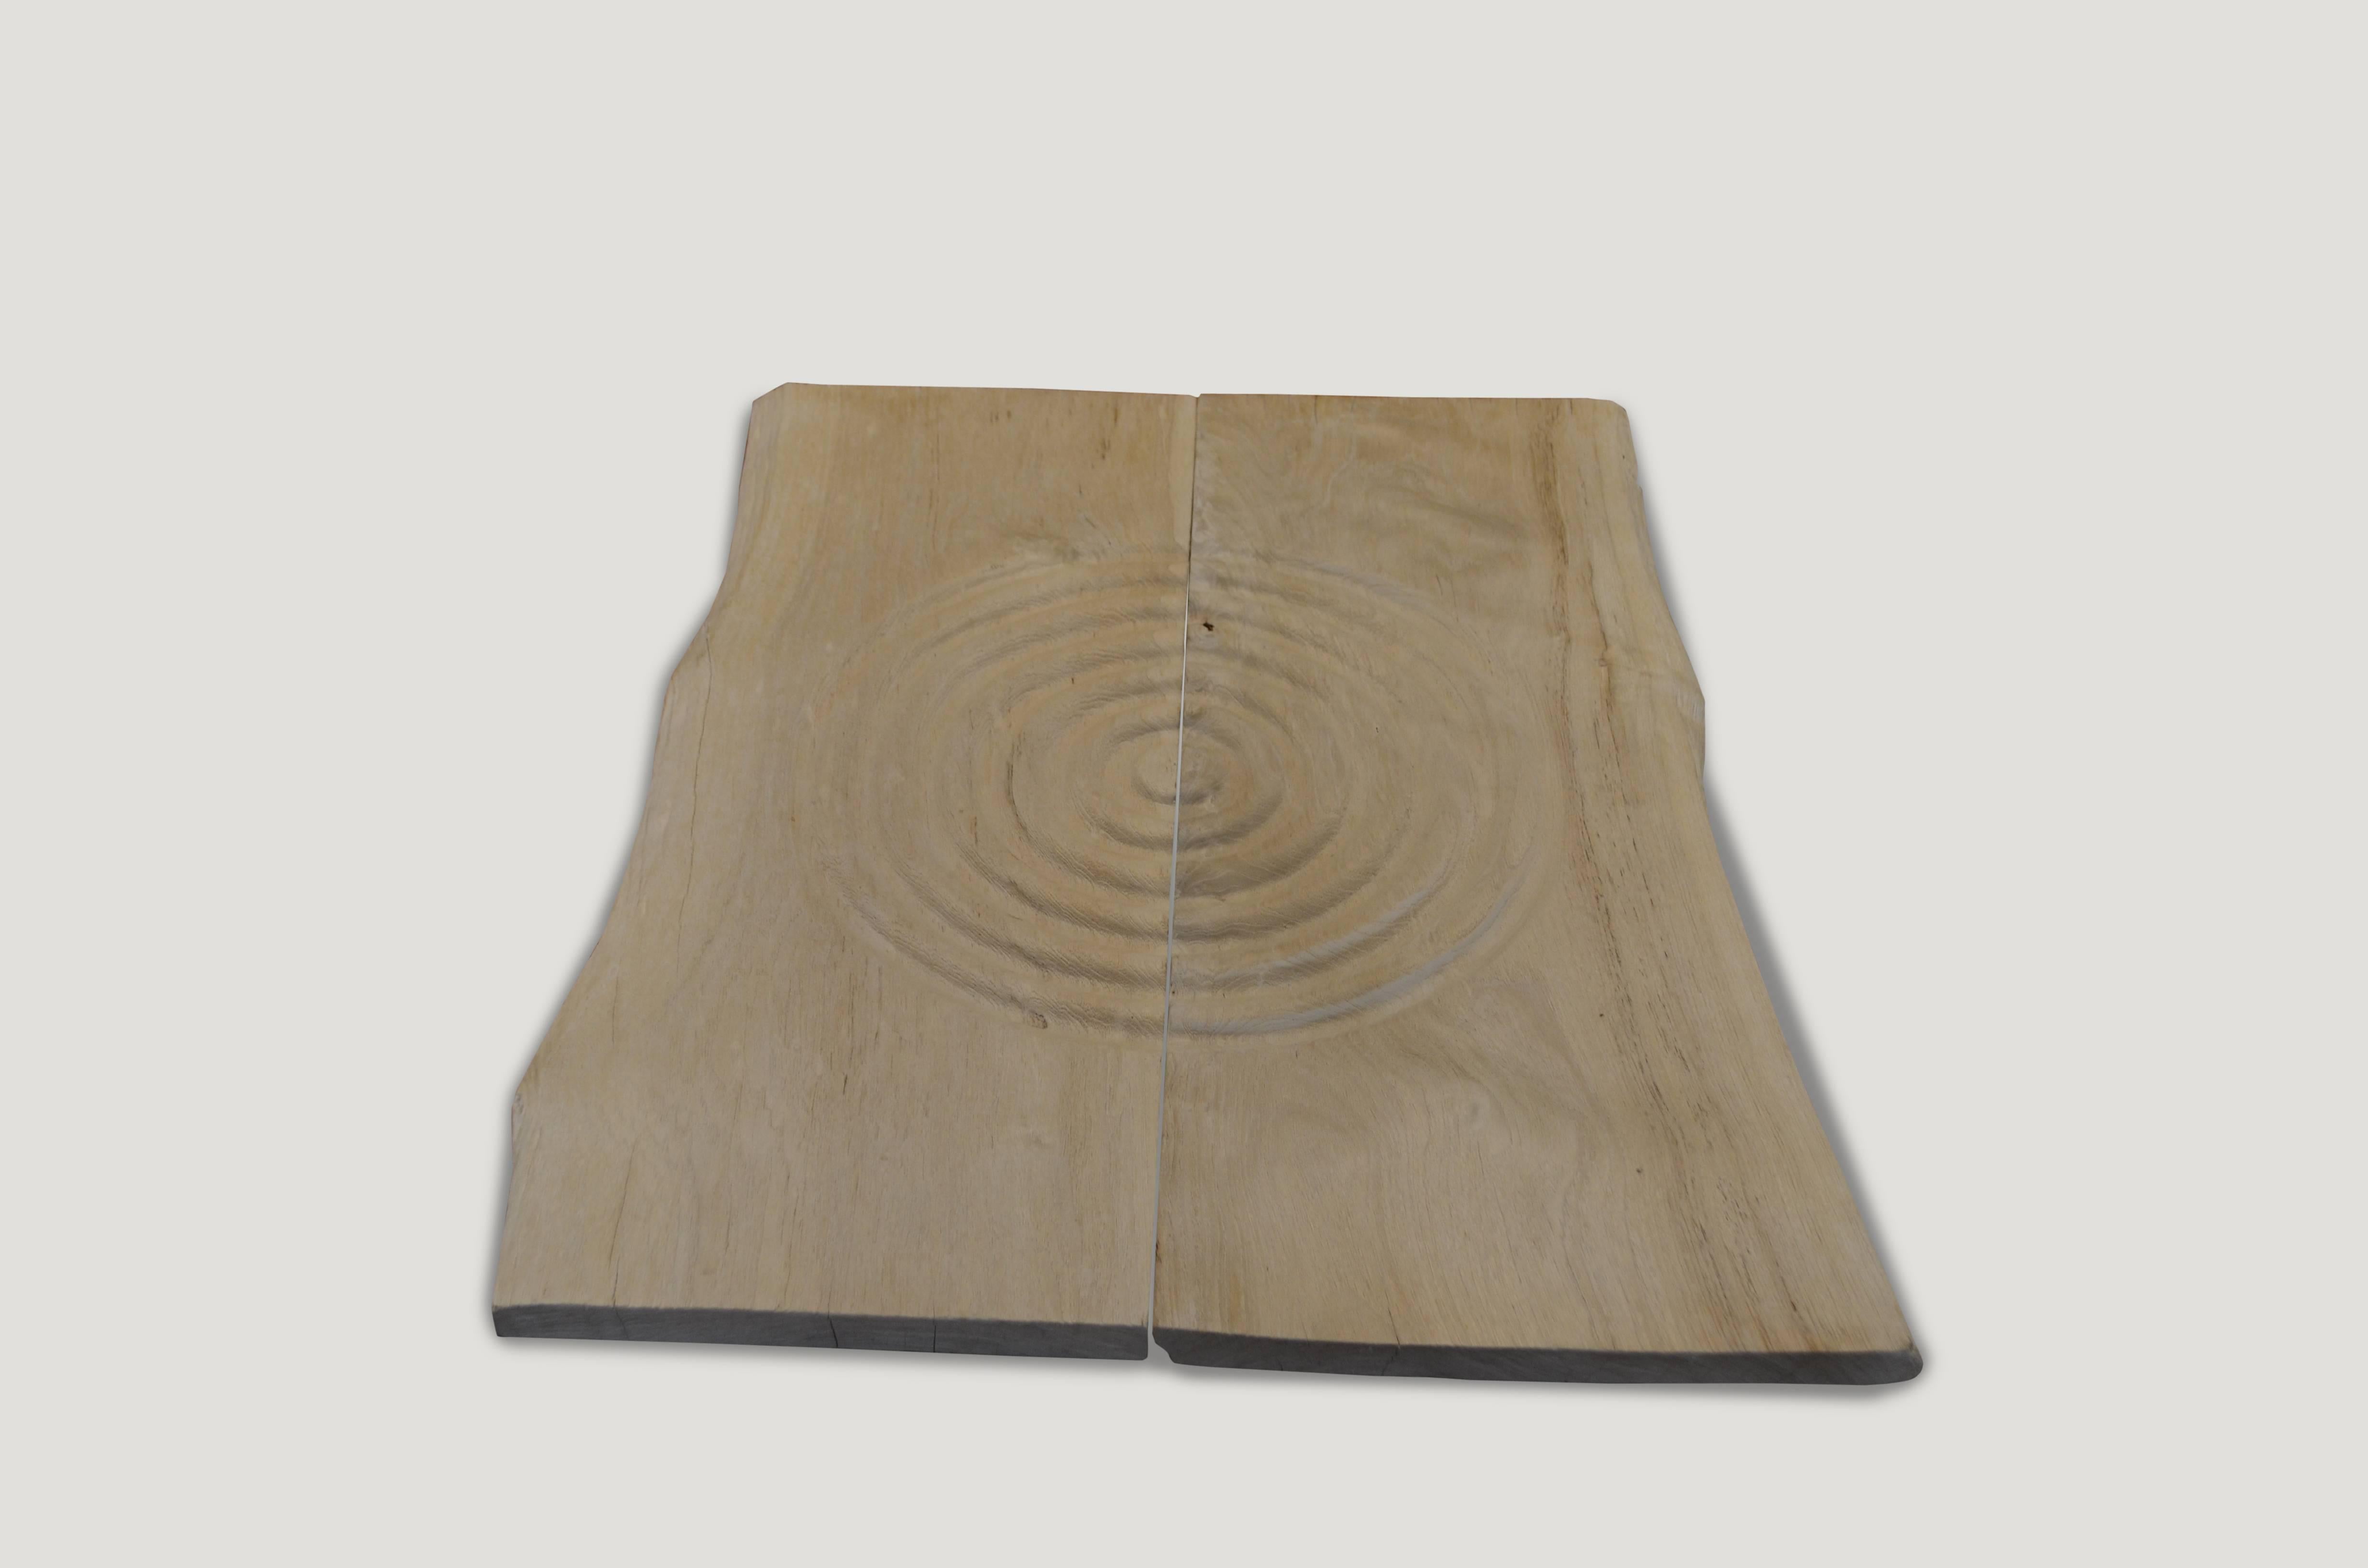 Bleached reclaimed teak wood panel. Hand carved minimalist circle with a natural live edge. Beautiful hanging on a wall vertical or horizontal, placed together or with a space between. Organic is the new modern.

The St. Barts collection features